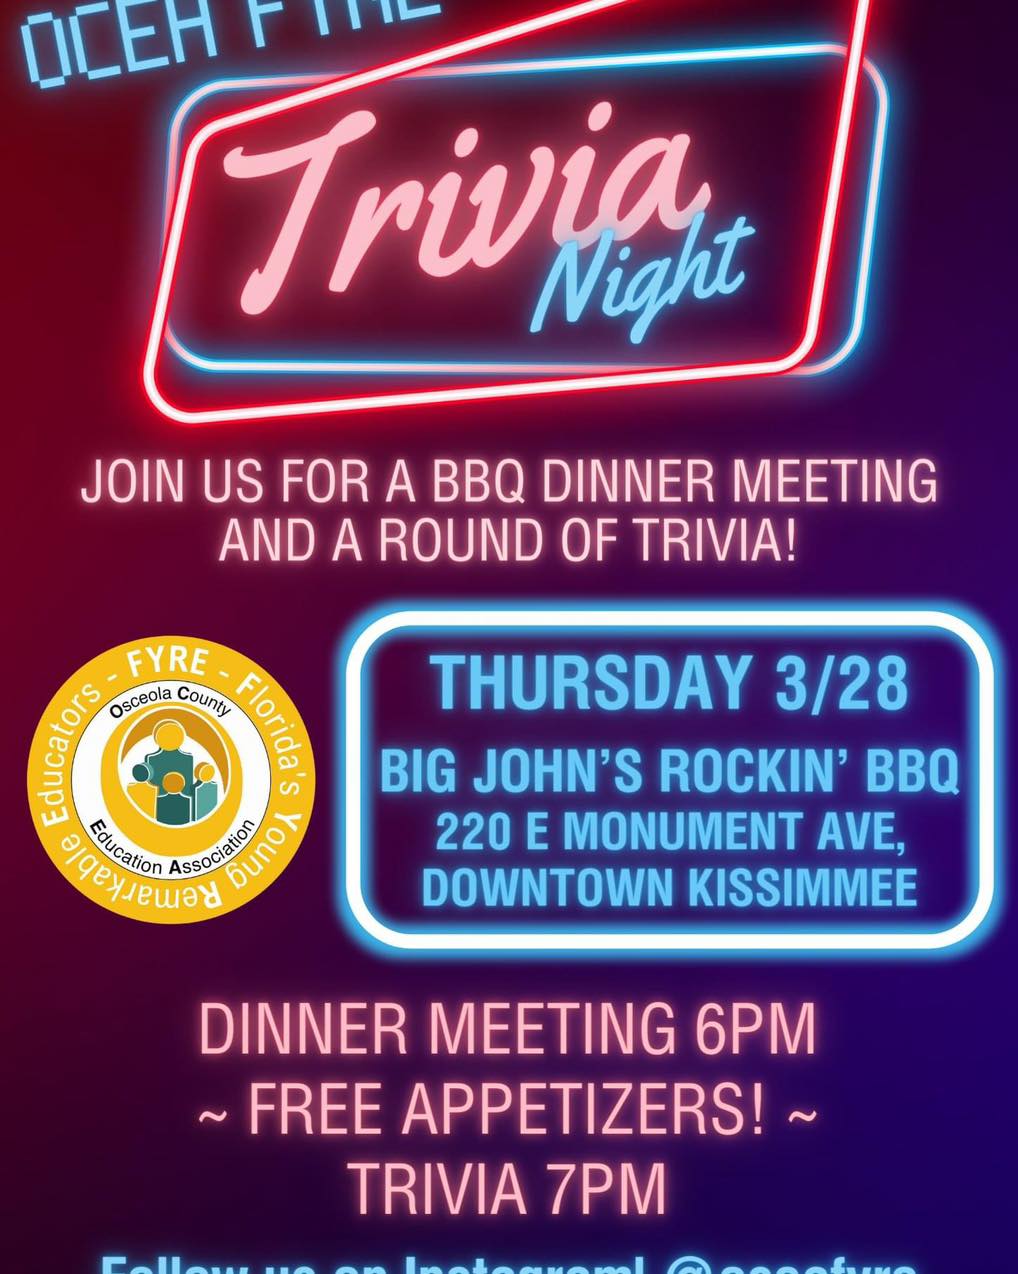 Join OCEA FYRE for a BBQ Dinner meeting and a round of trivia at Big John's Rockin' BBQ. 